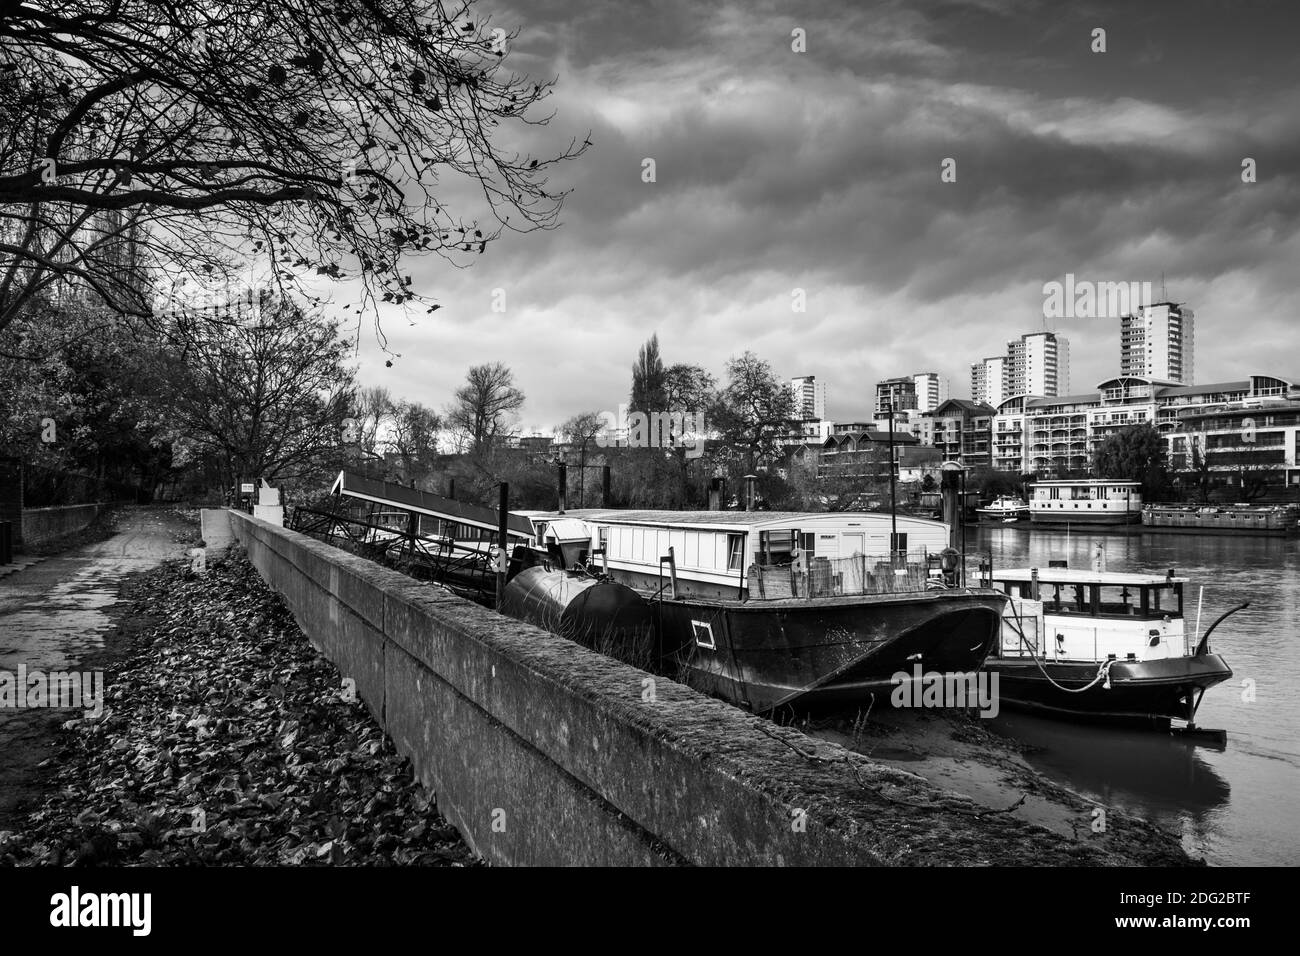 Europe, UK, England, London, black & white shot of houseboats on the Thames in Kew, buildings in Chiswick, Autumn, no people, thames path Stock Photo